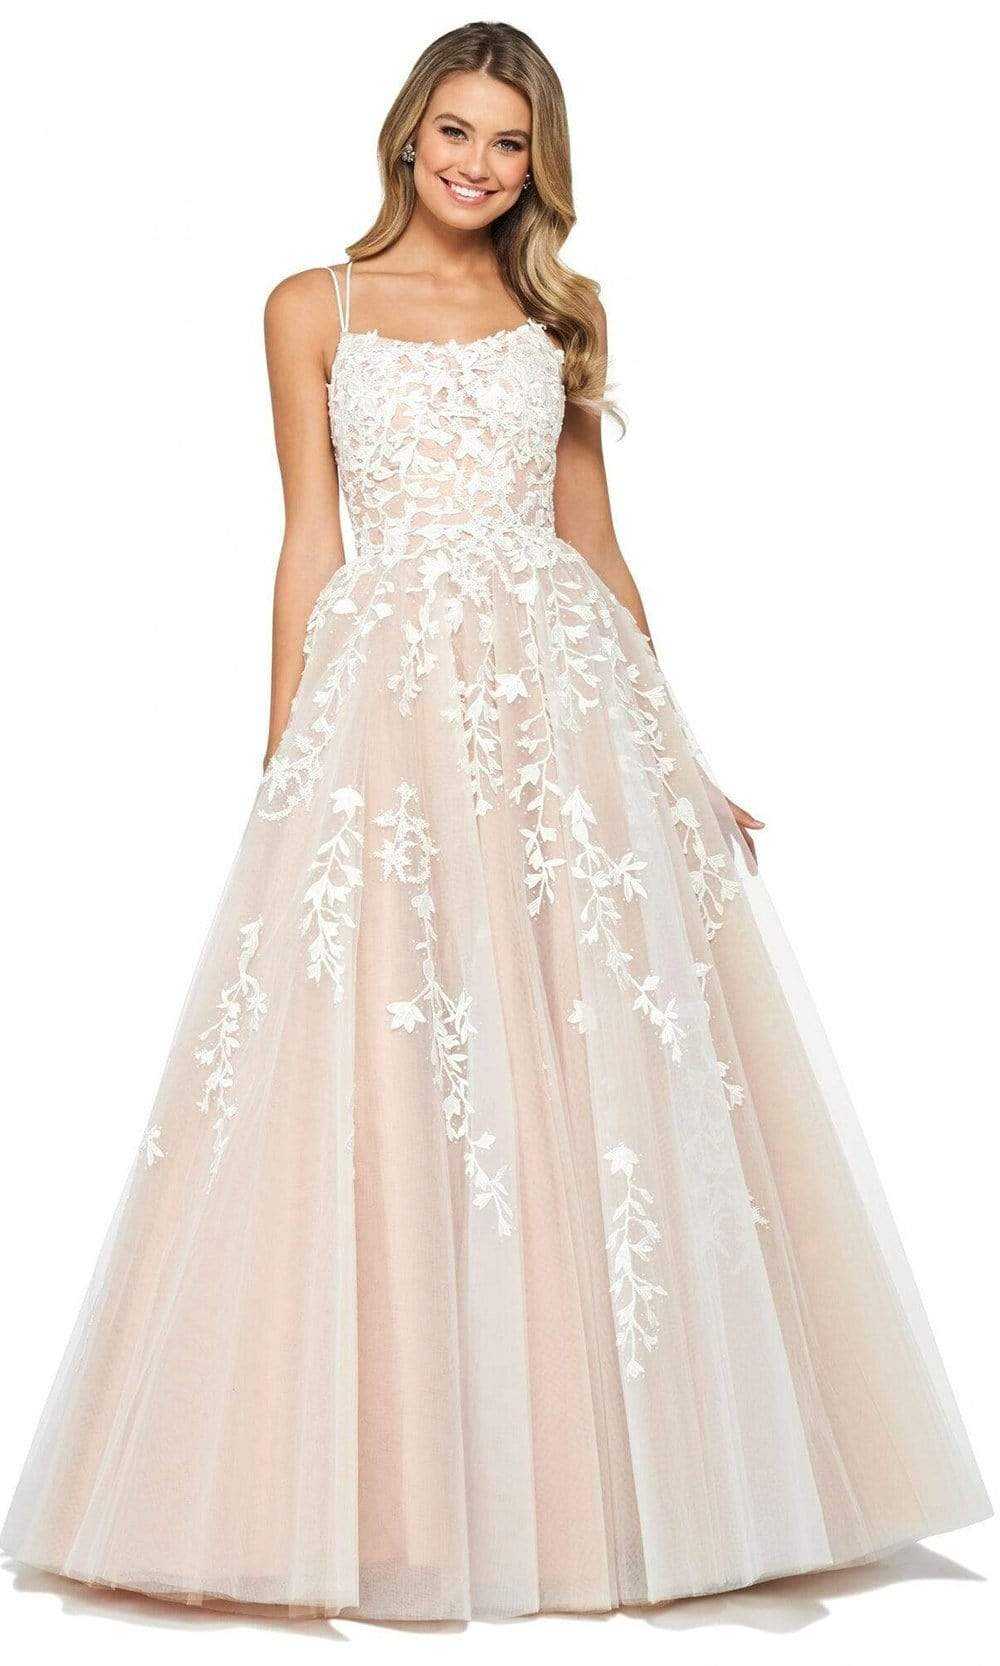 Sherri Hill, Sherri Hill - Floral Lace Appliqued Lace-up Back Ballgown 53116 - 1 pc Ivory/Nude In Size 00 Available